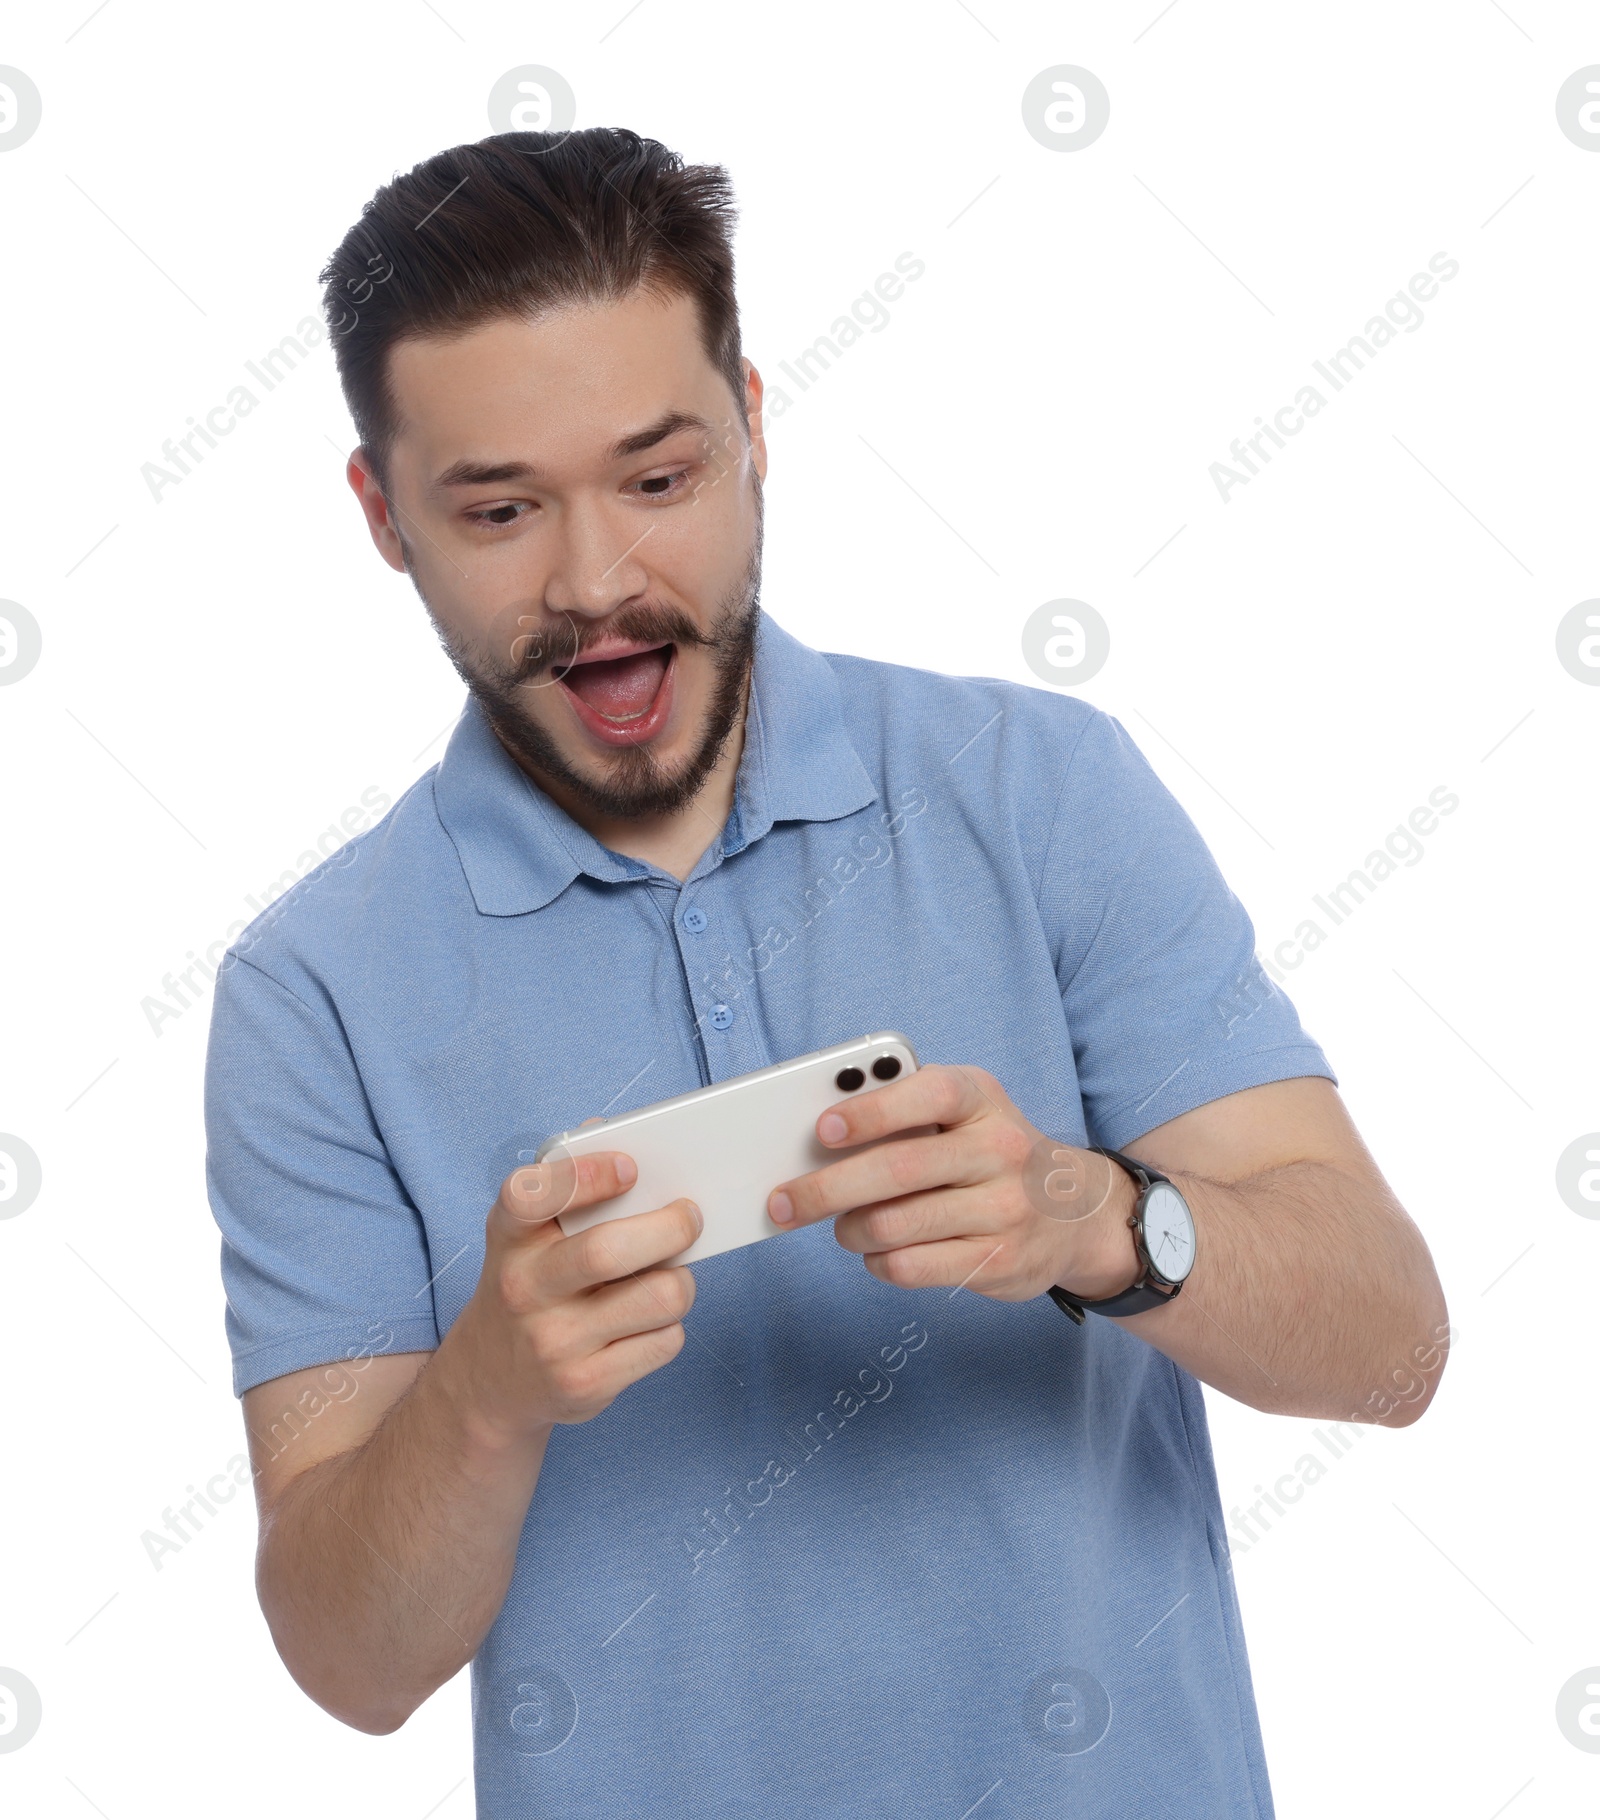 Photo of Emotional man playing game on phone against white background